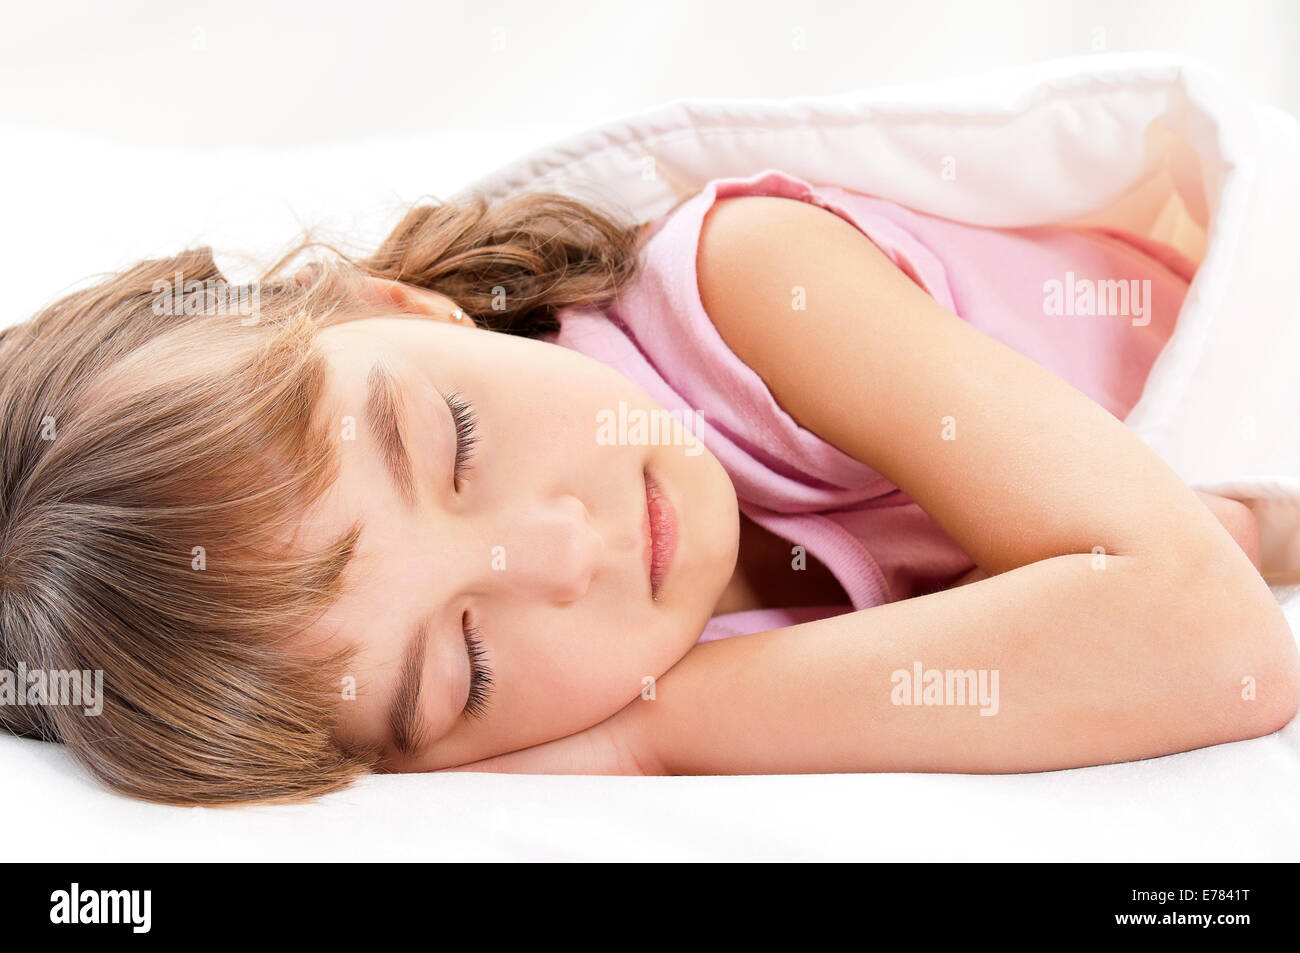 Girl on bed Stock Photo